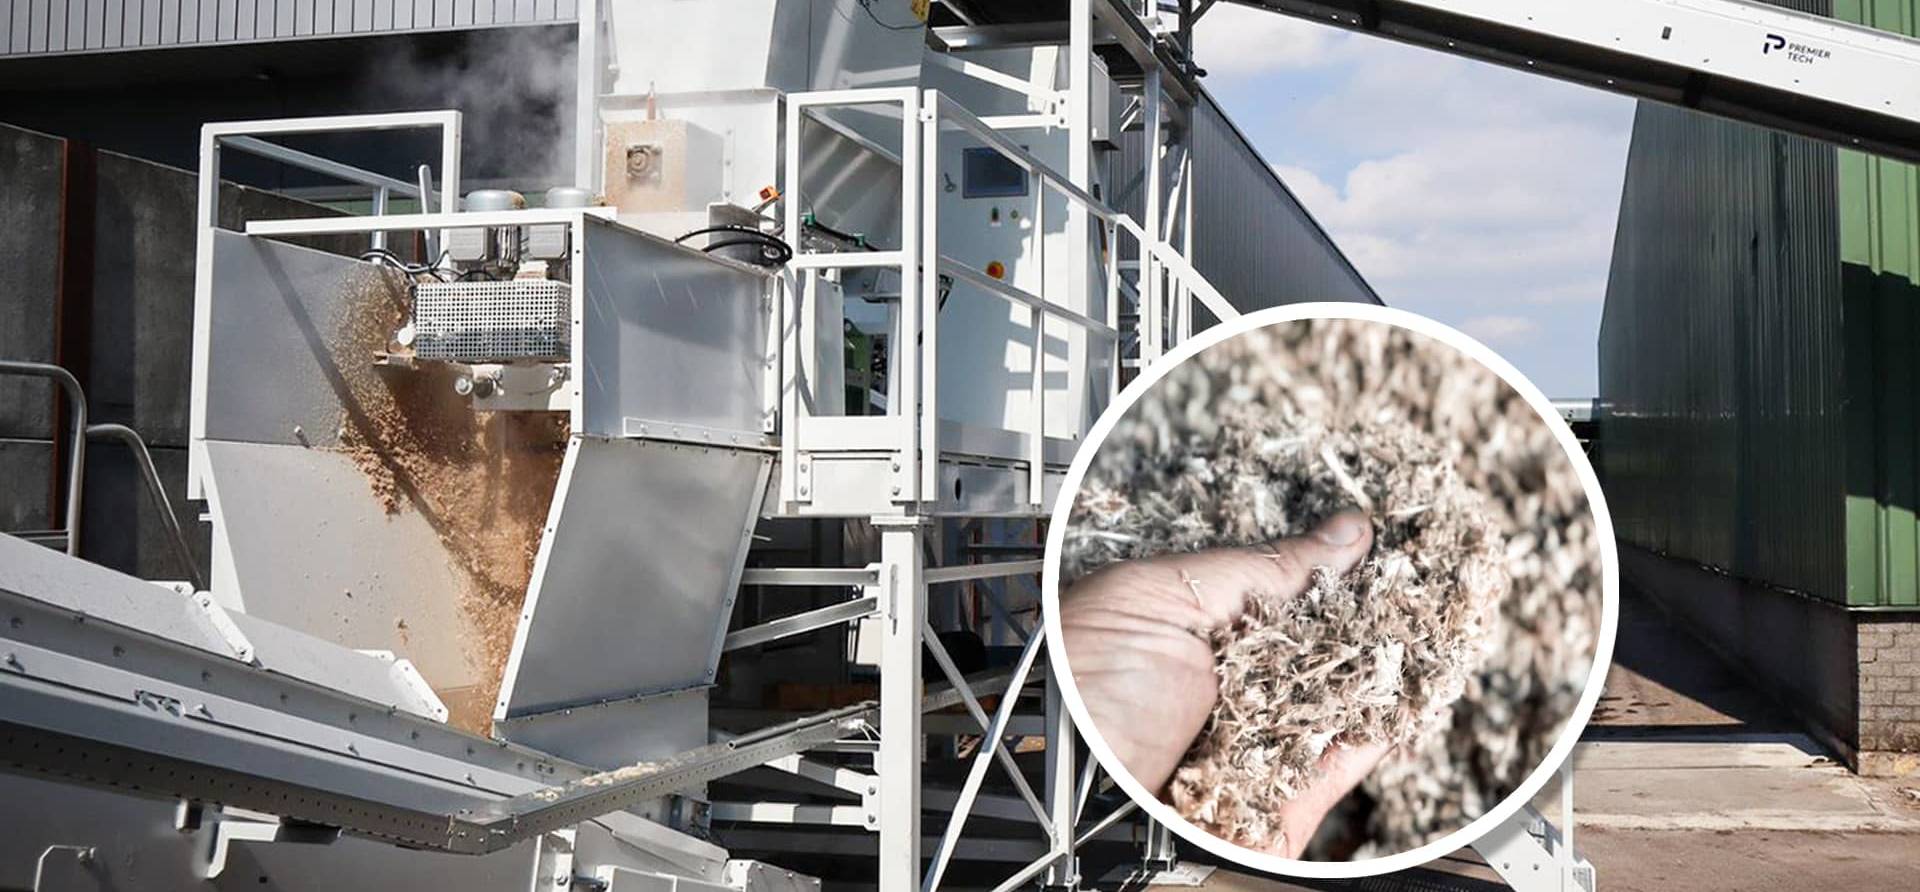 Image of a wood fiber machine in action and close up on wood fiber material in a person's hands